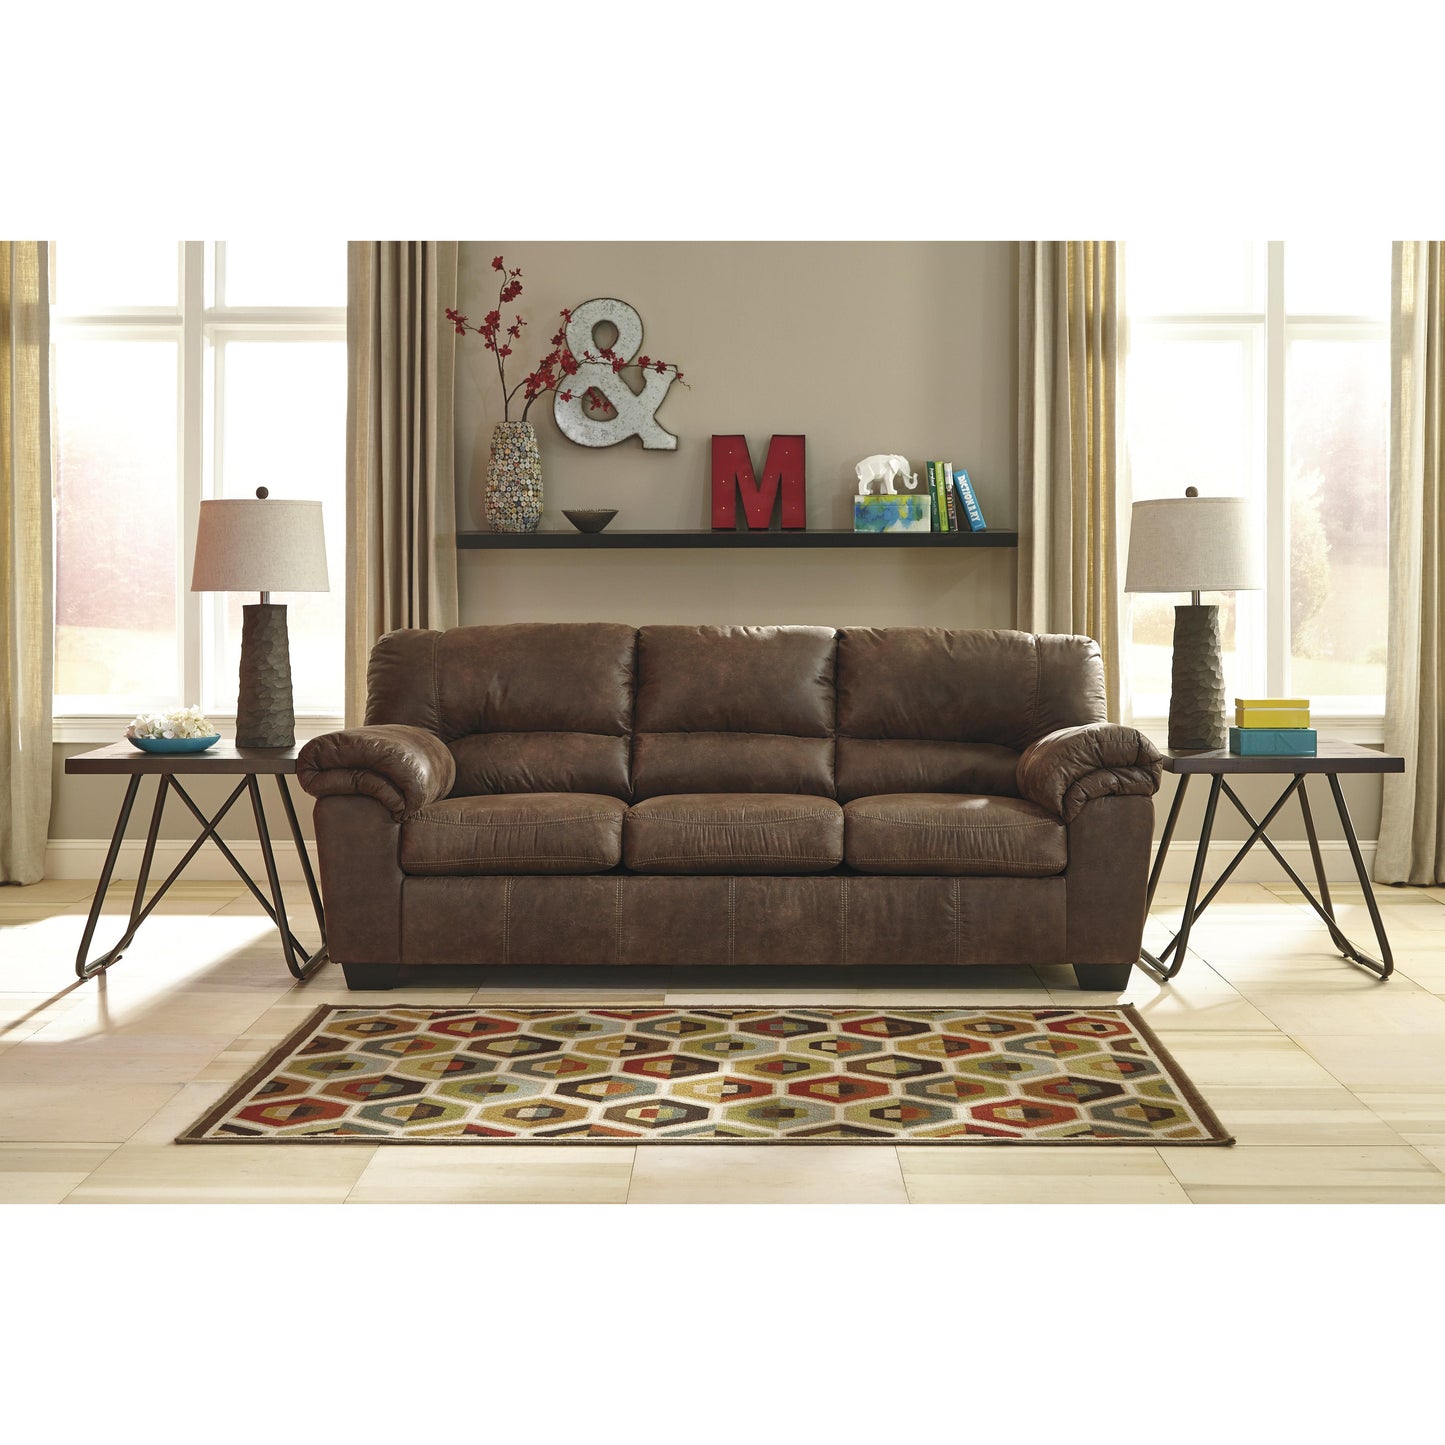 Signature Design by Ashley Bladen Stationary Leather Look Sofa 1202038